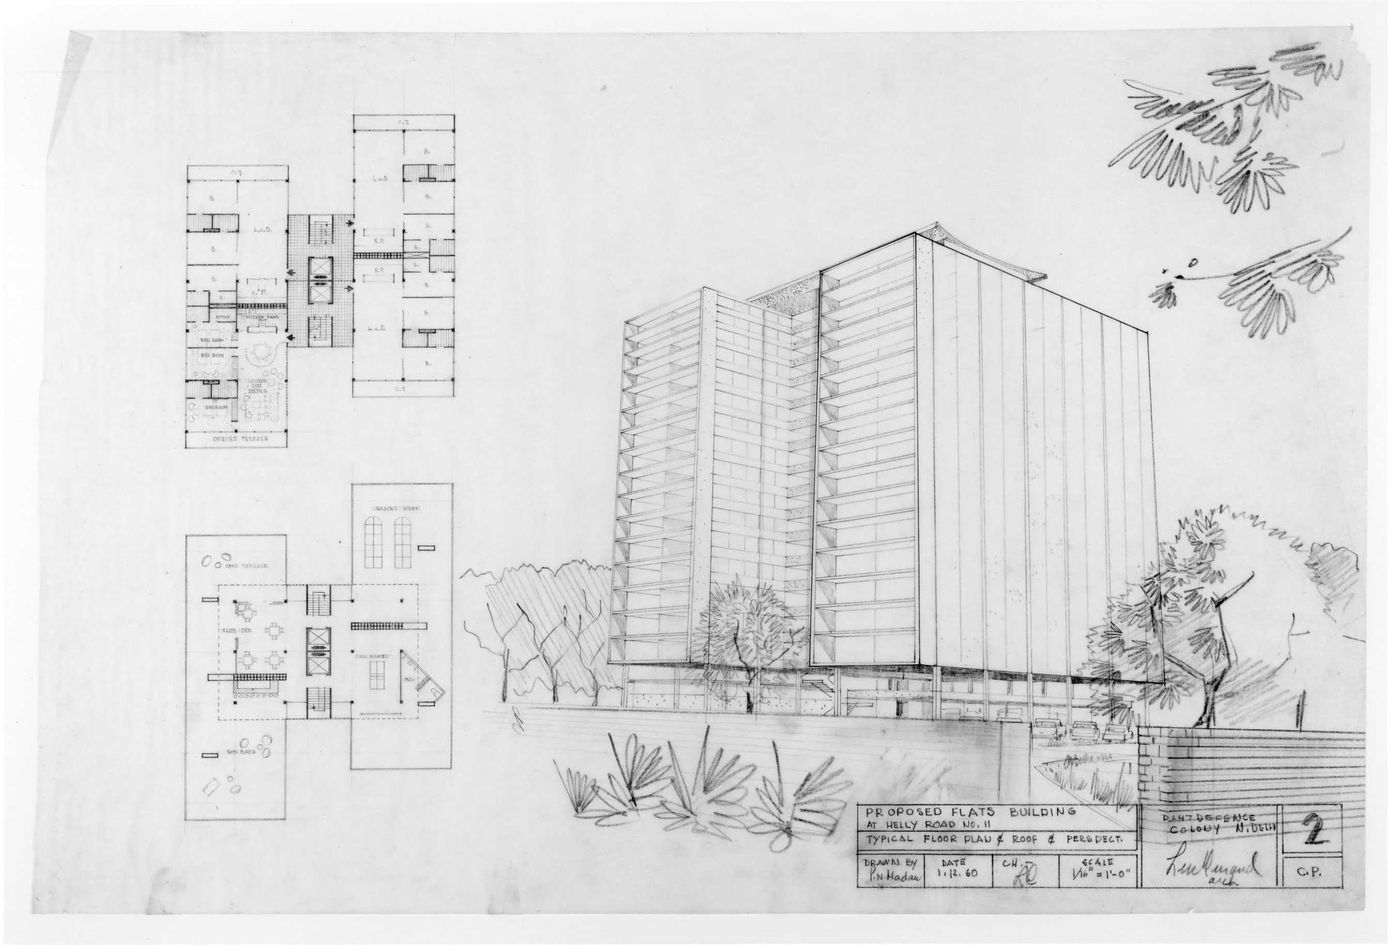 Proposed Flats Building, Helly Road: Plan d'étage et perspective